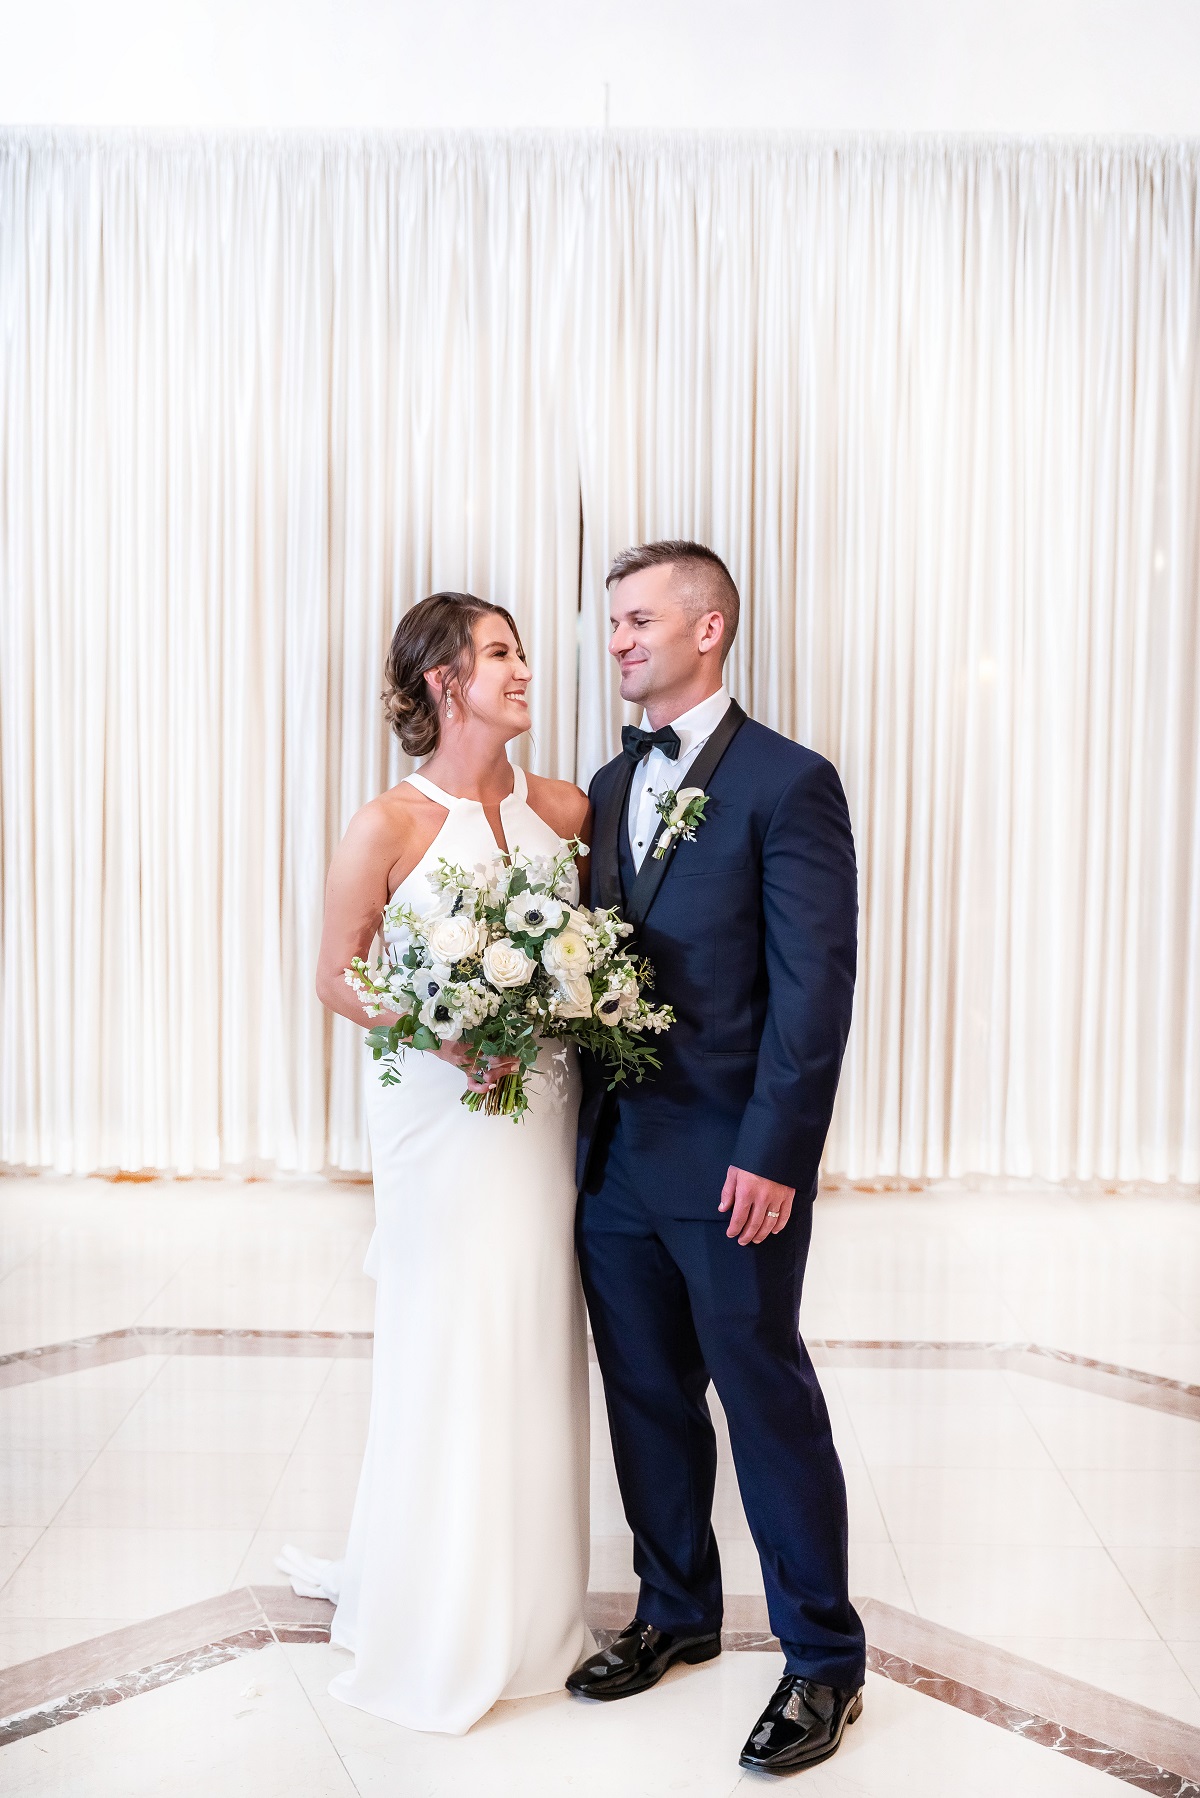 Haley Harris and Jacob Harder on their wedding day on 'Married at First Sight'